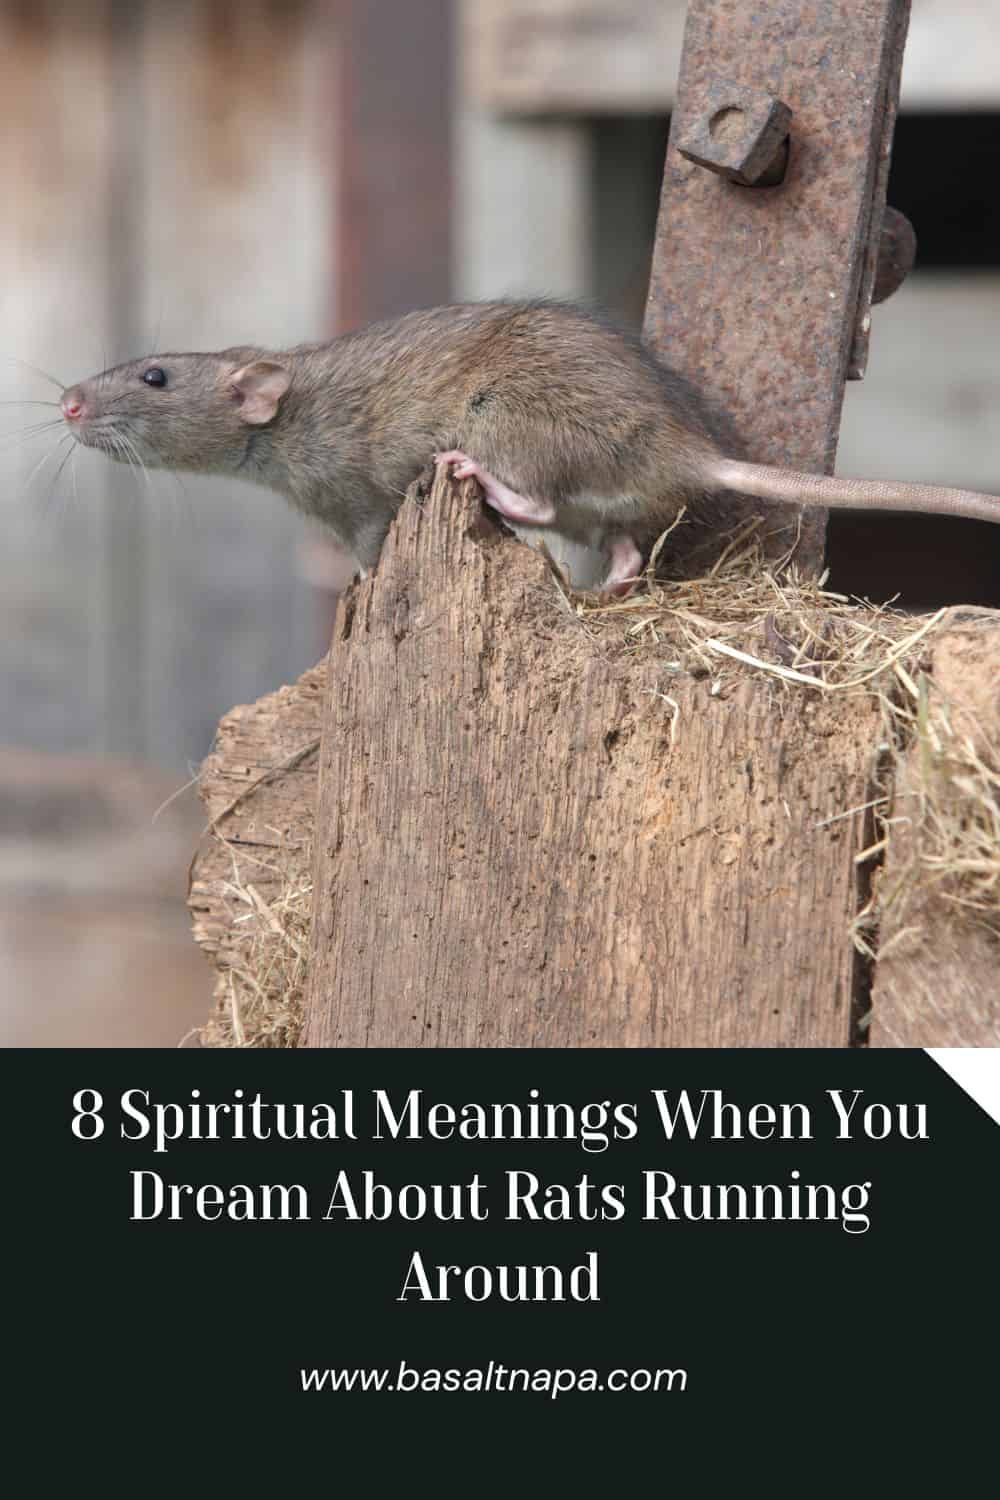 The General Meaning of Rats in Dreams